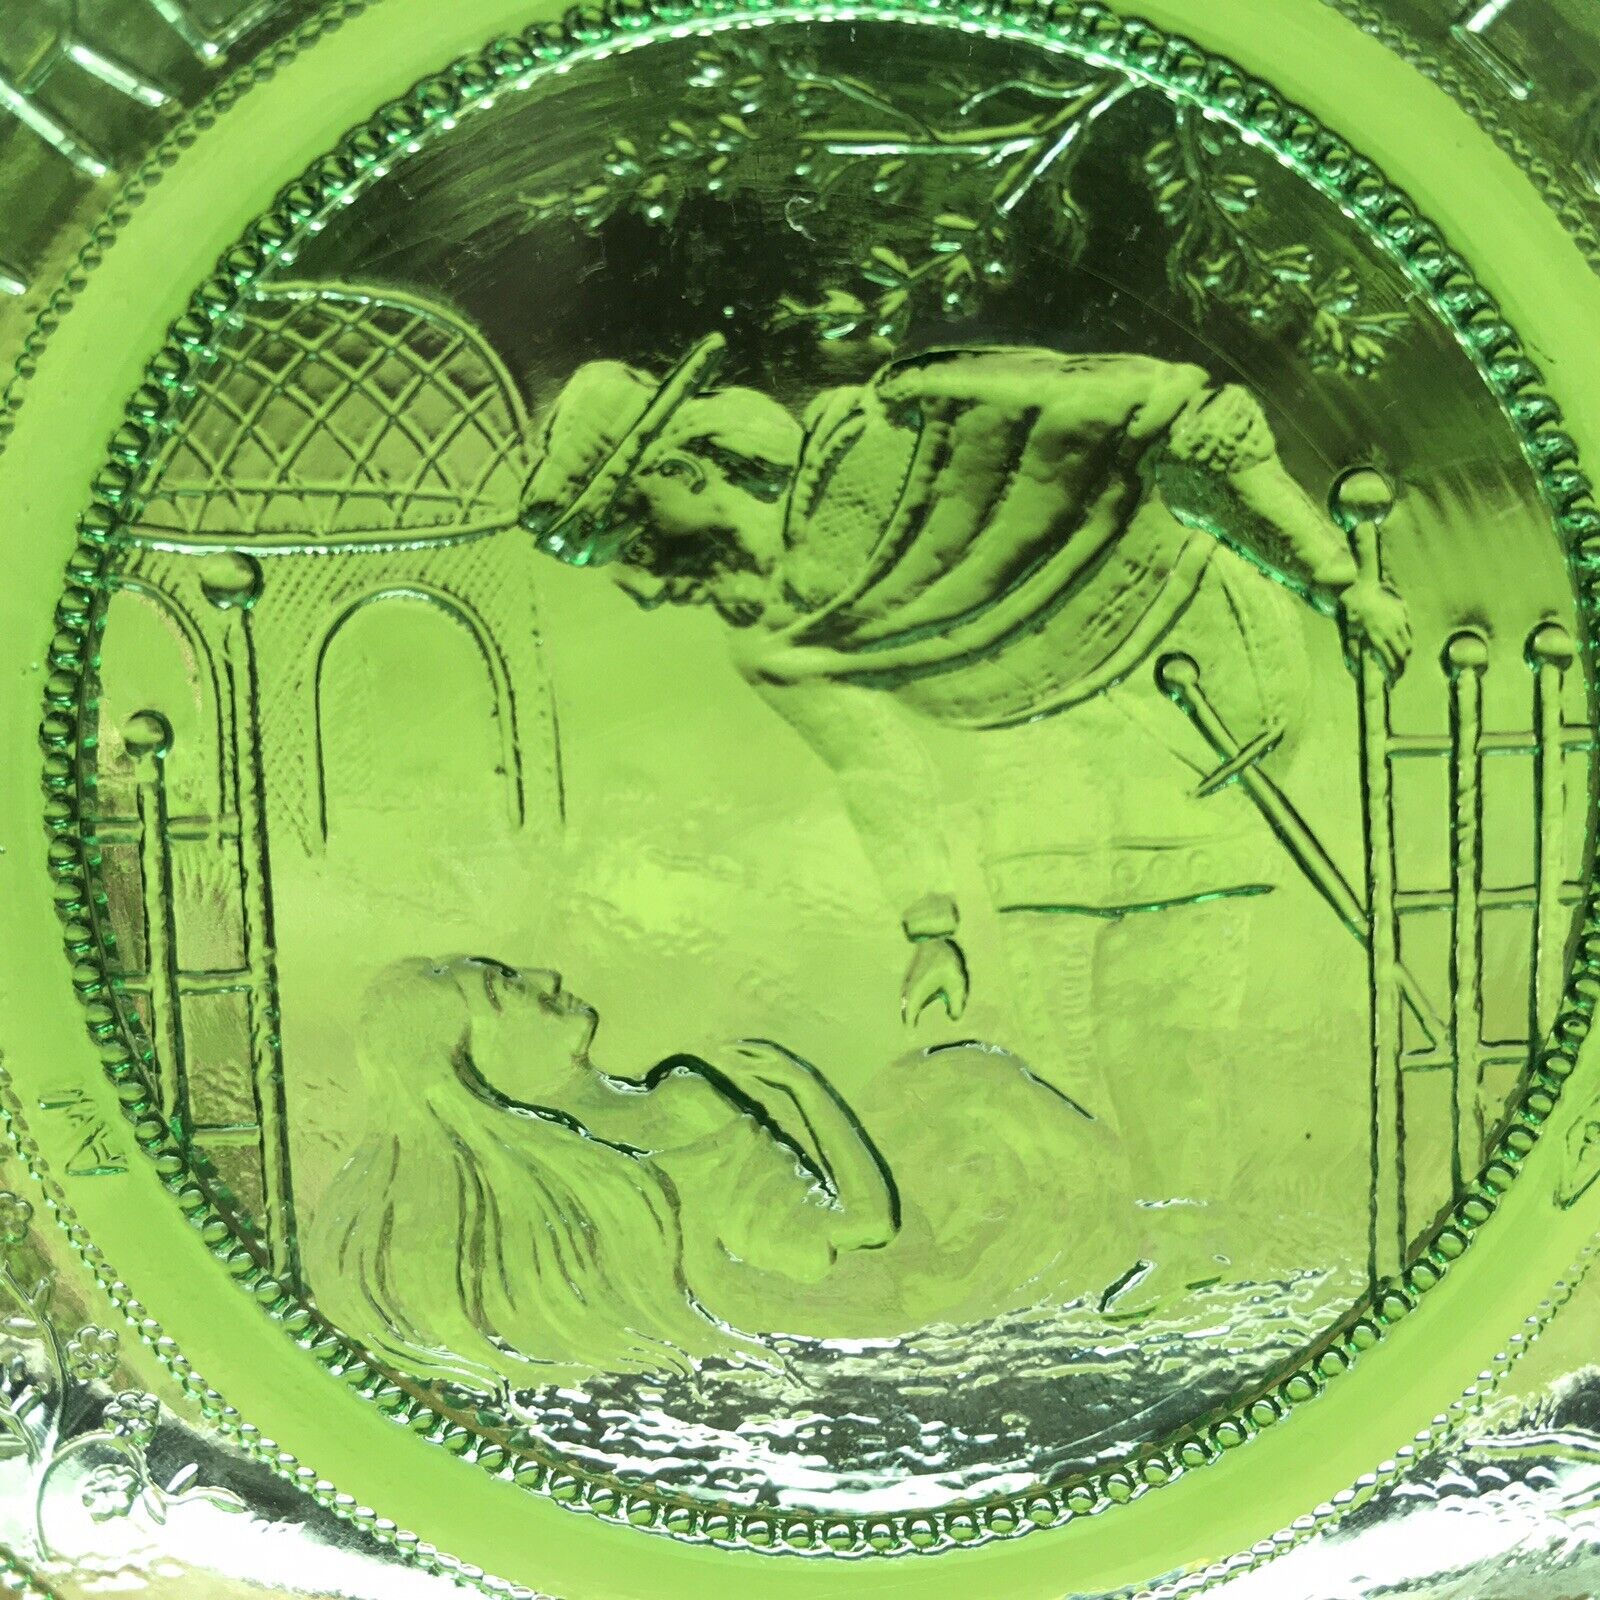 French Revolution Art Glass Historical Home VTG Collectible Pairpoint Cup Plate